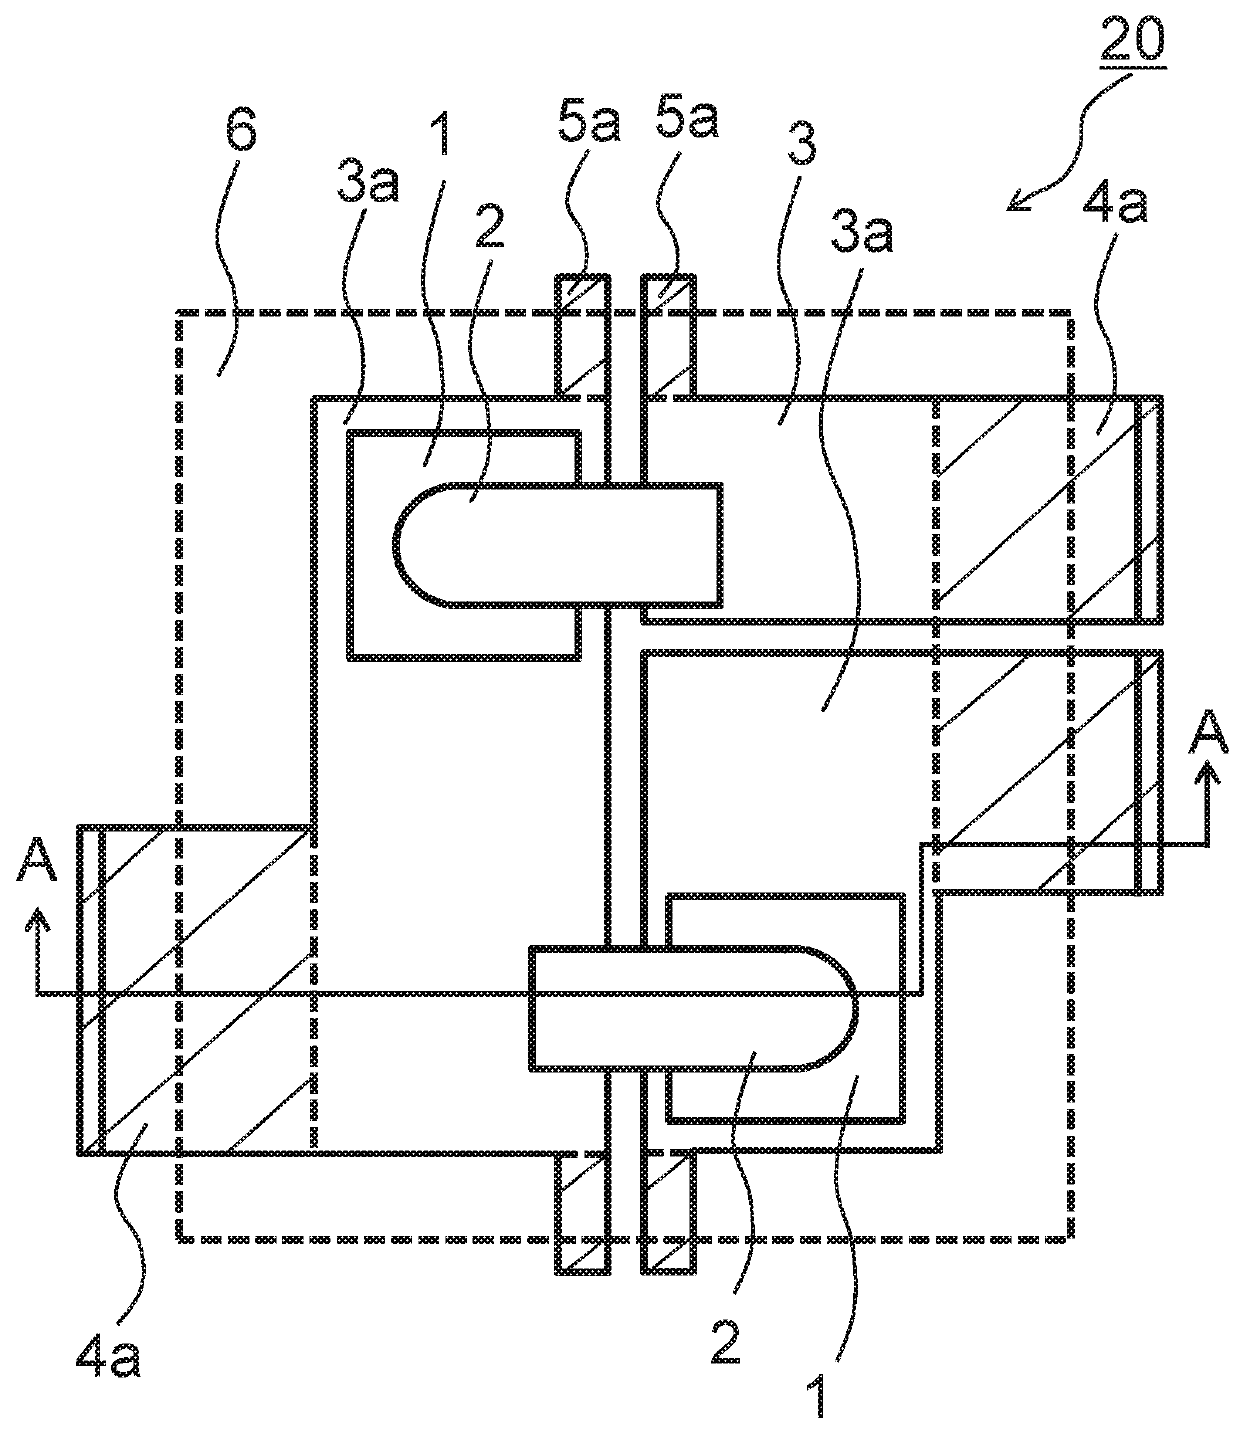 Molded resin-sealed power semiconductor device